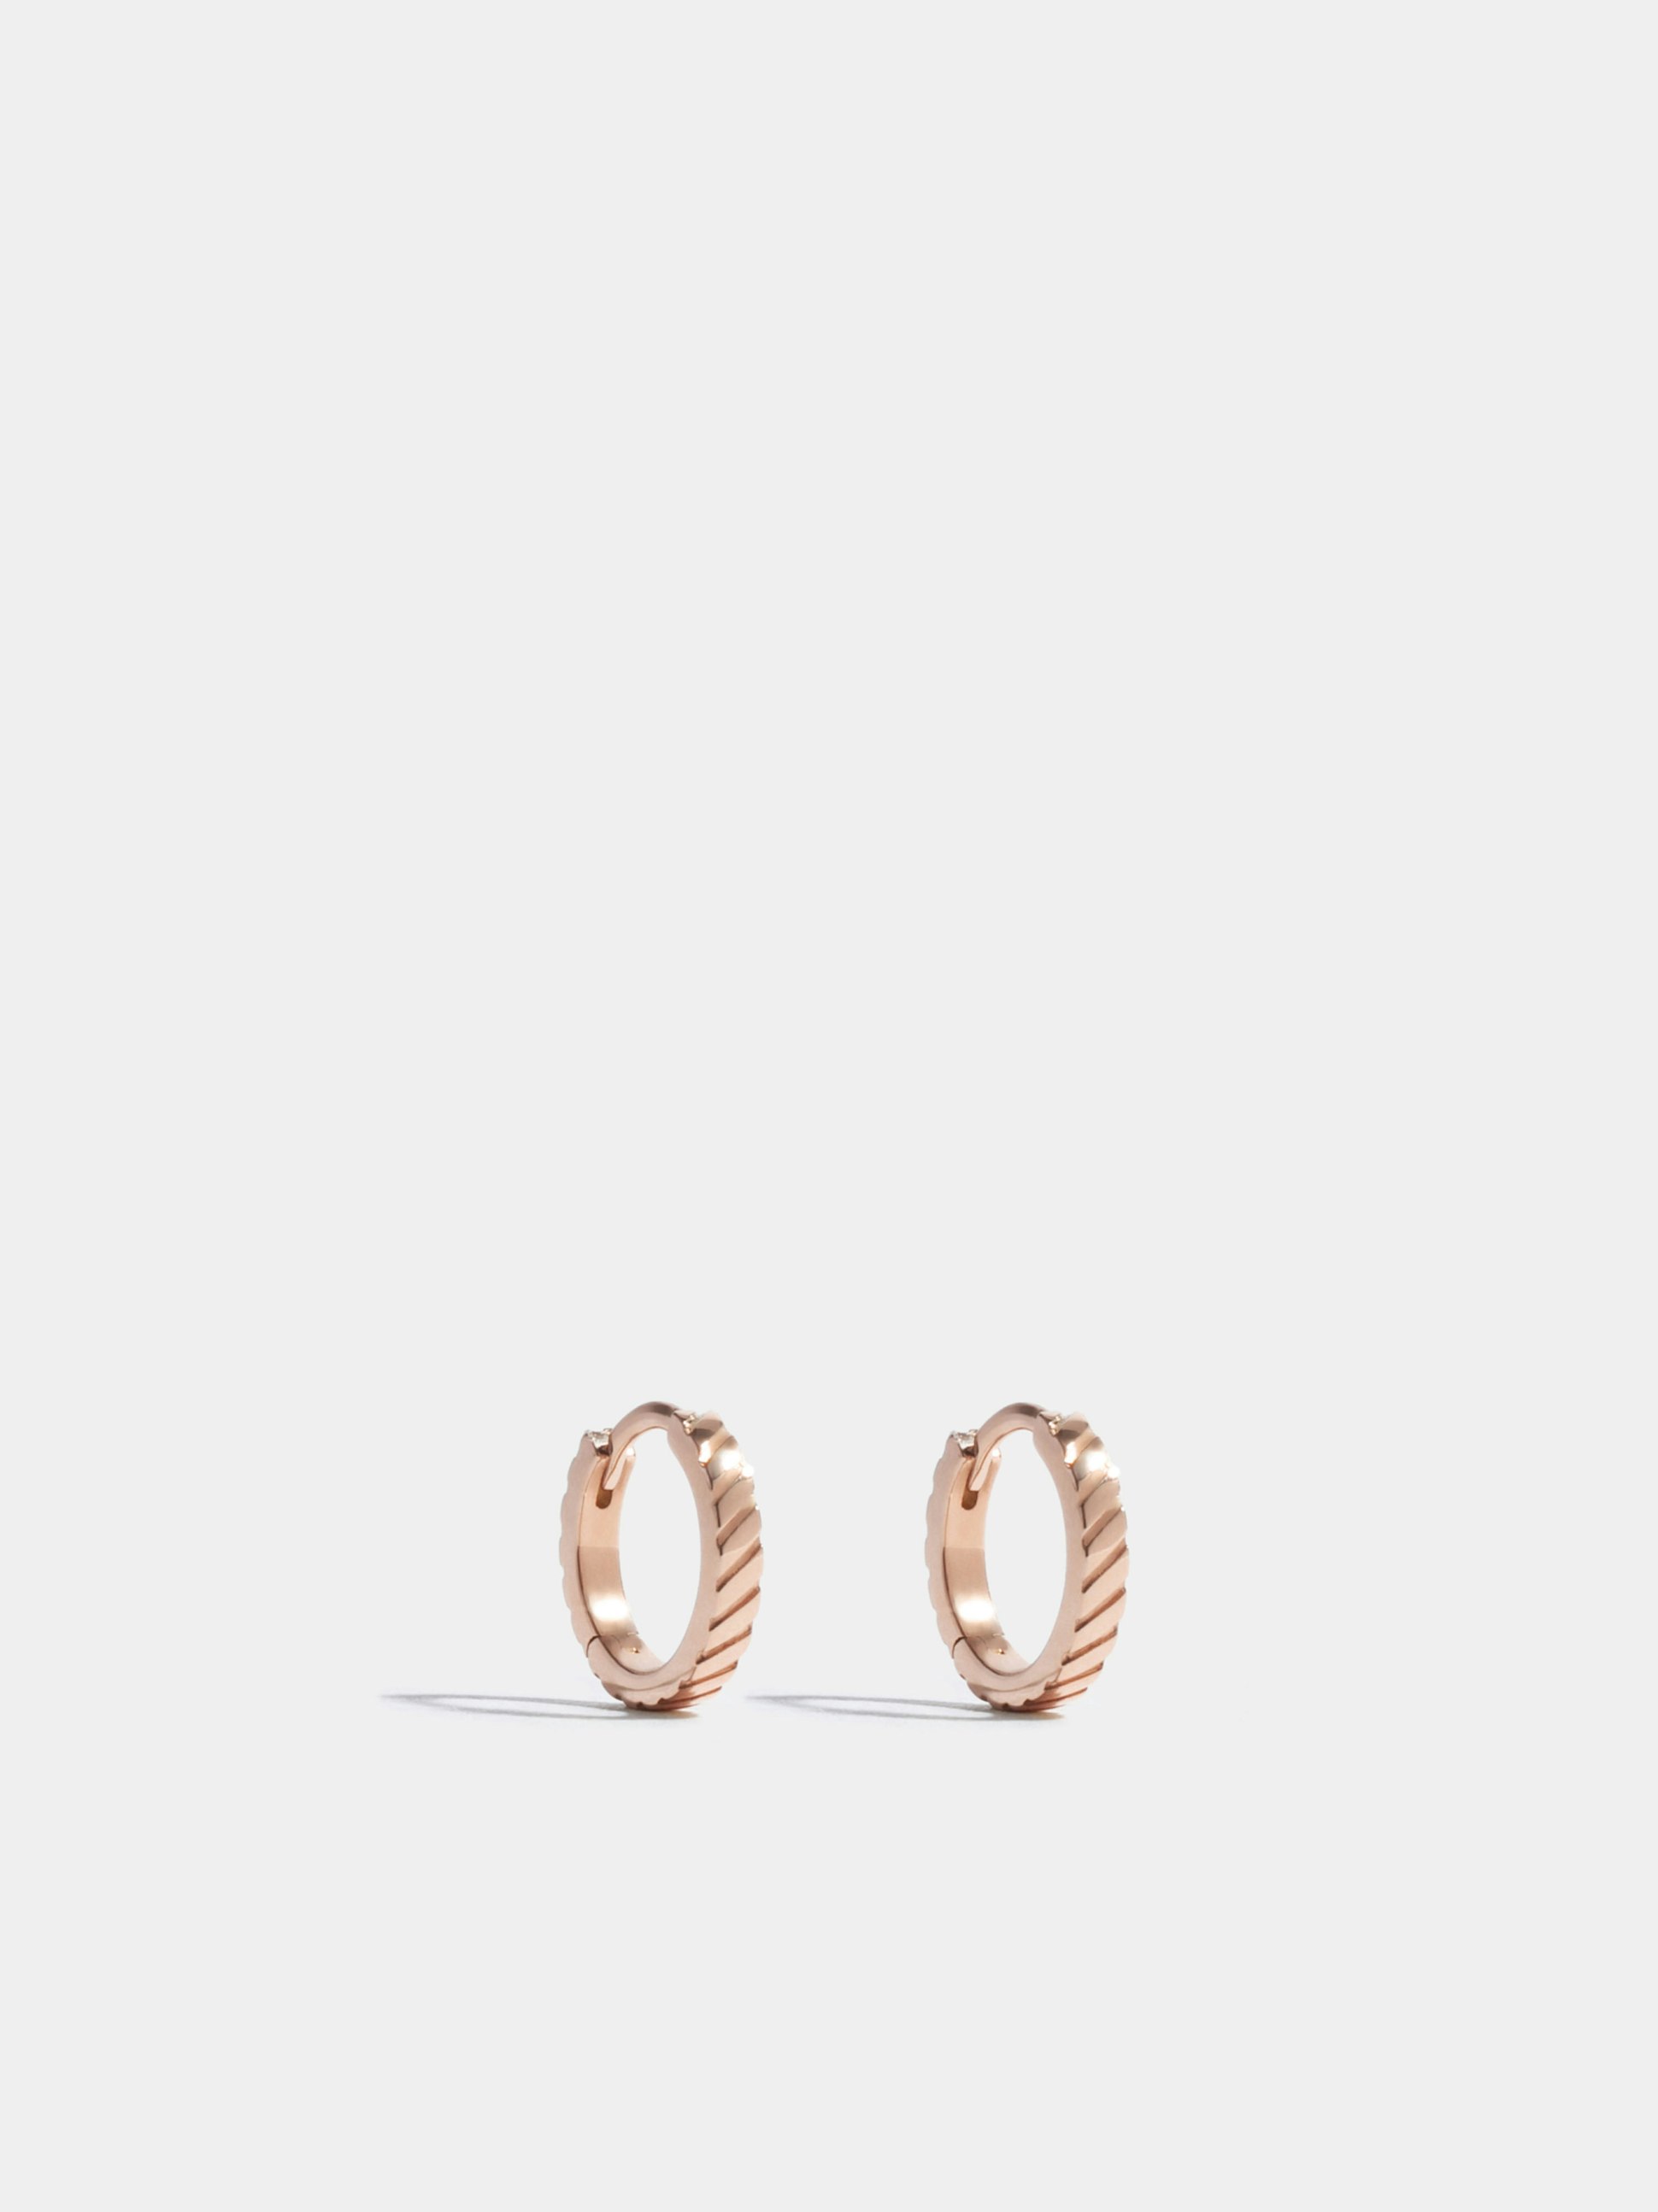 Anagramme grooved earrings in rose gold 18k Fairmined ethical